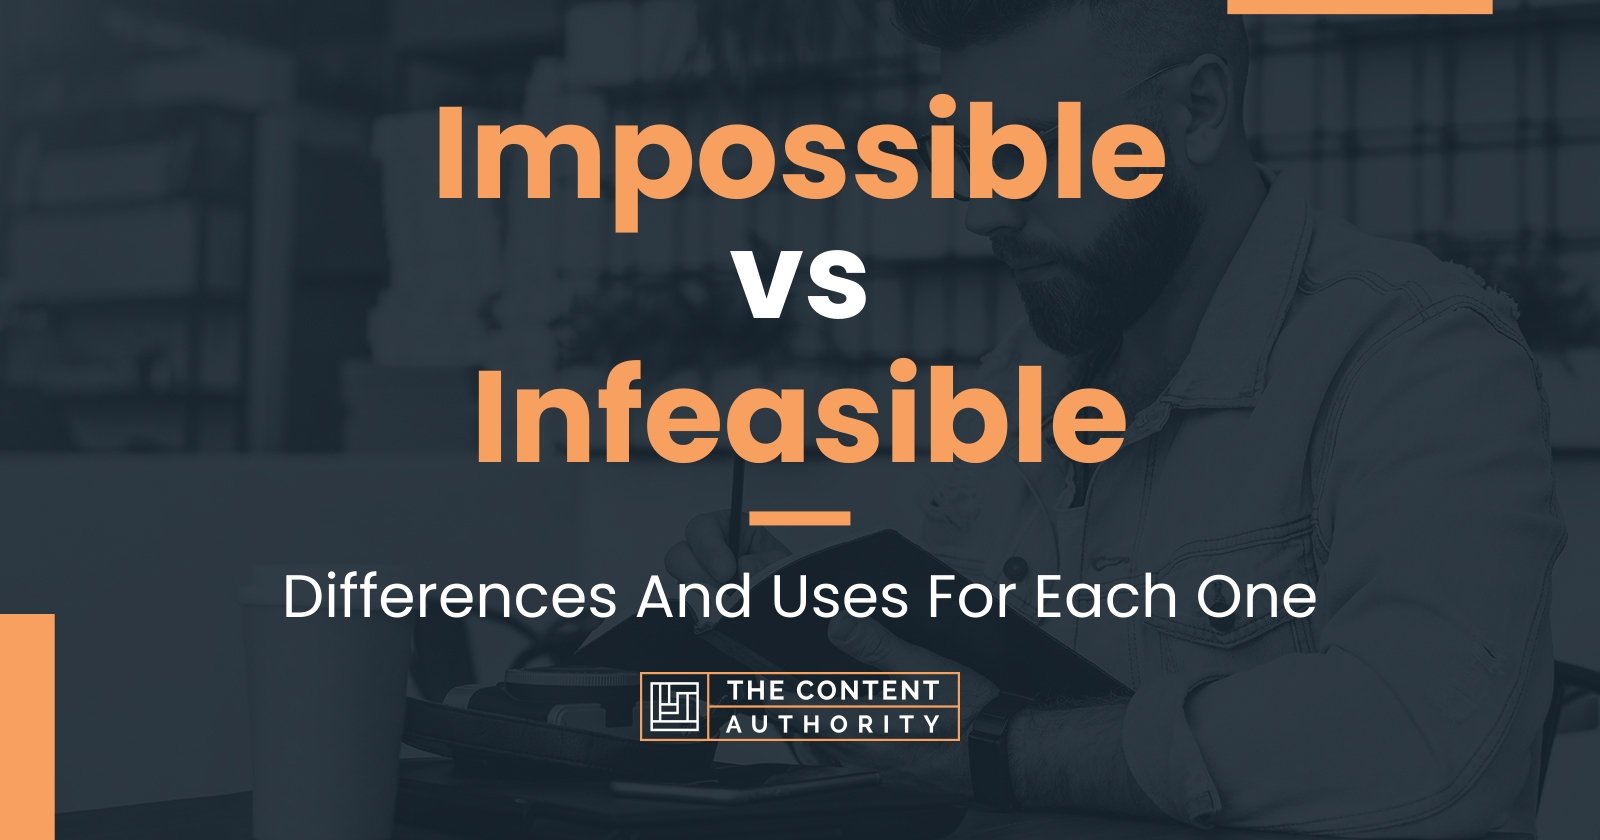 Impossible vs Infeasible: Differences And Uses For Each One